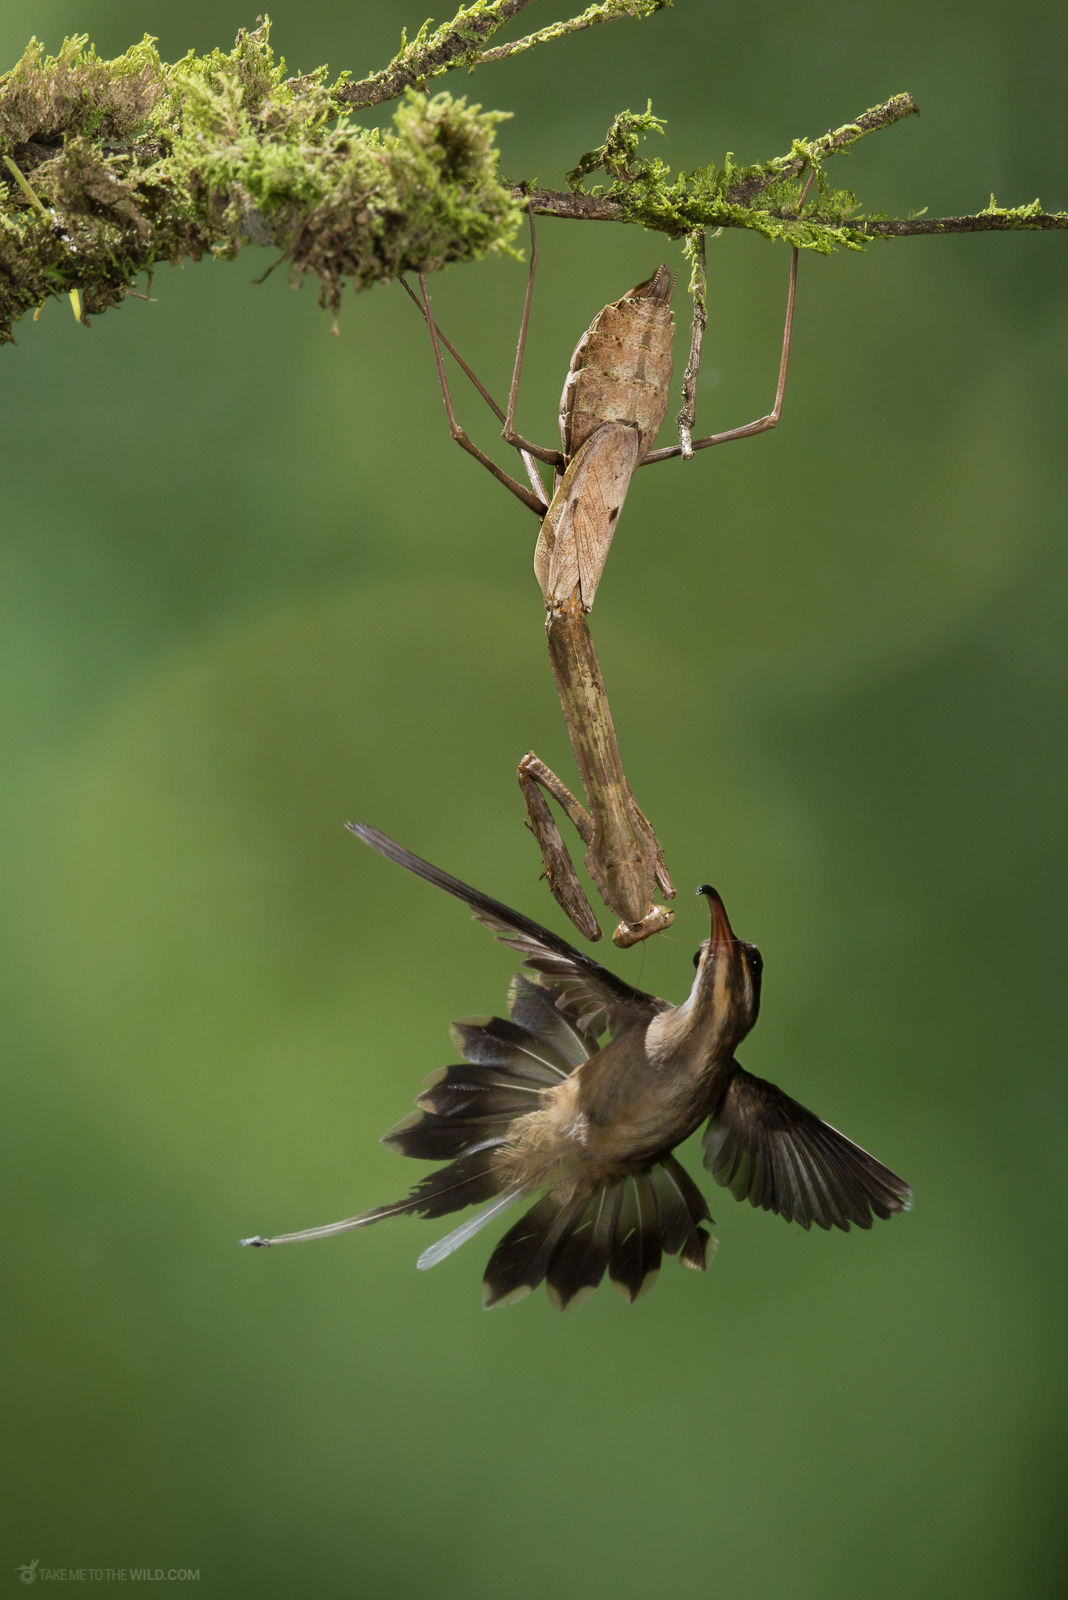 Long-billed Hermit (Phaethornis longirostris) pushing out of its terrytory a Mantis at the lowlands of Costa Rica